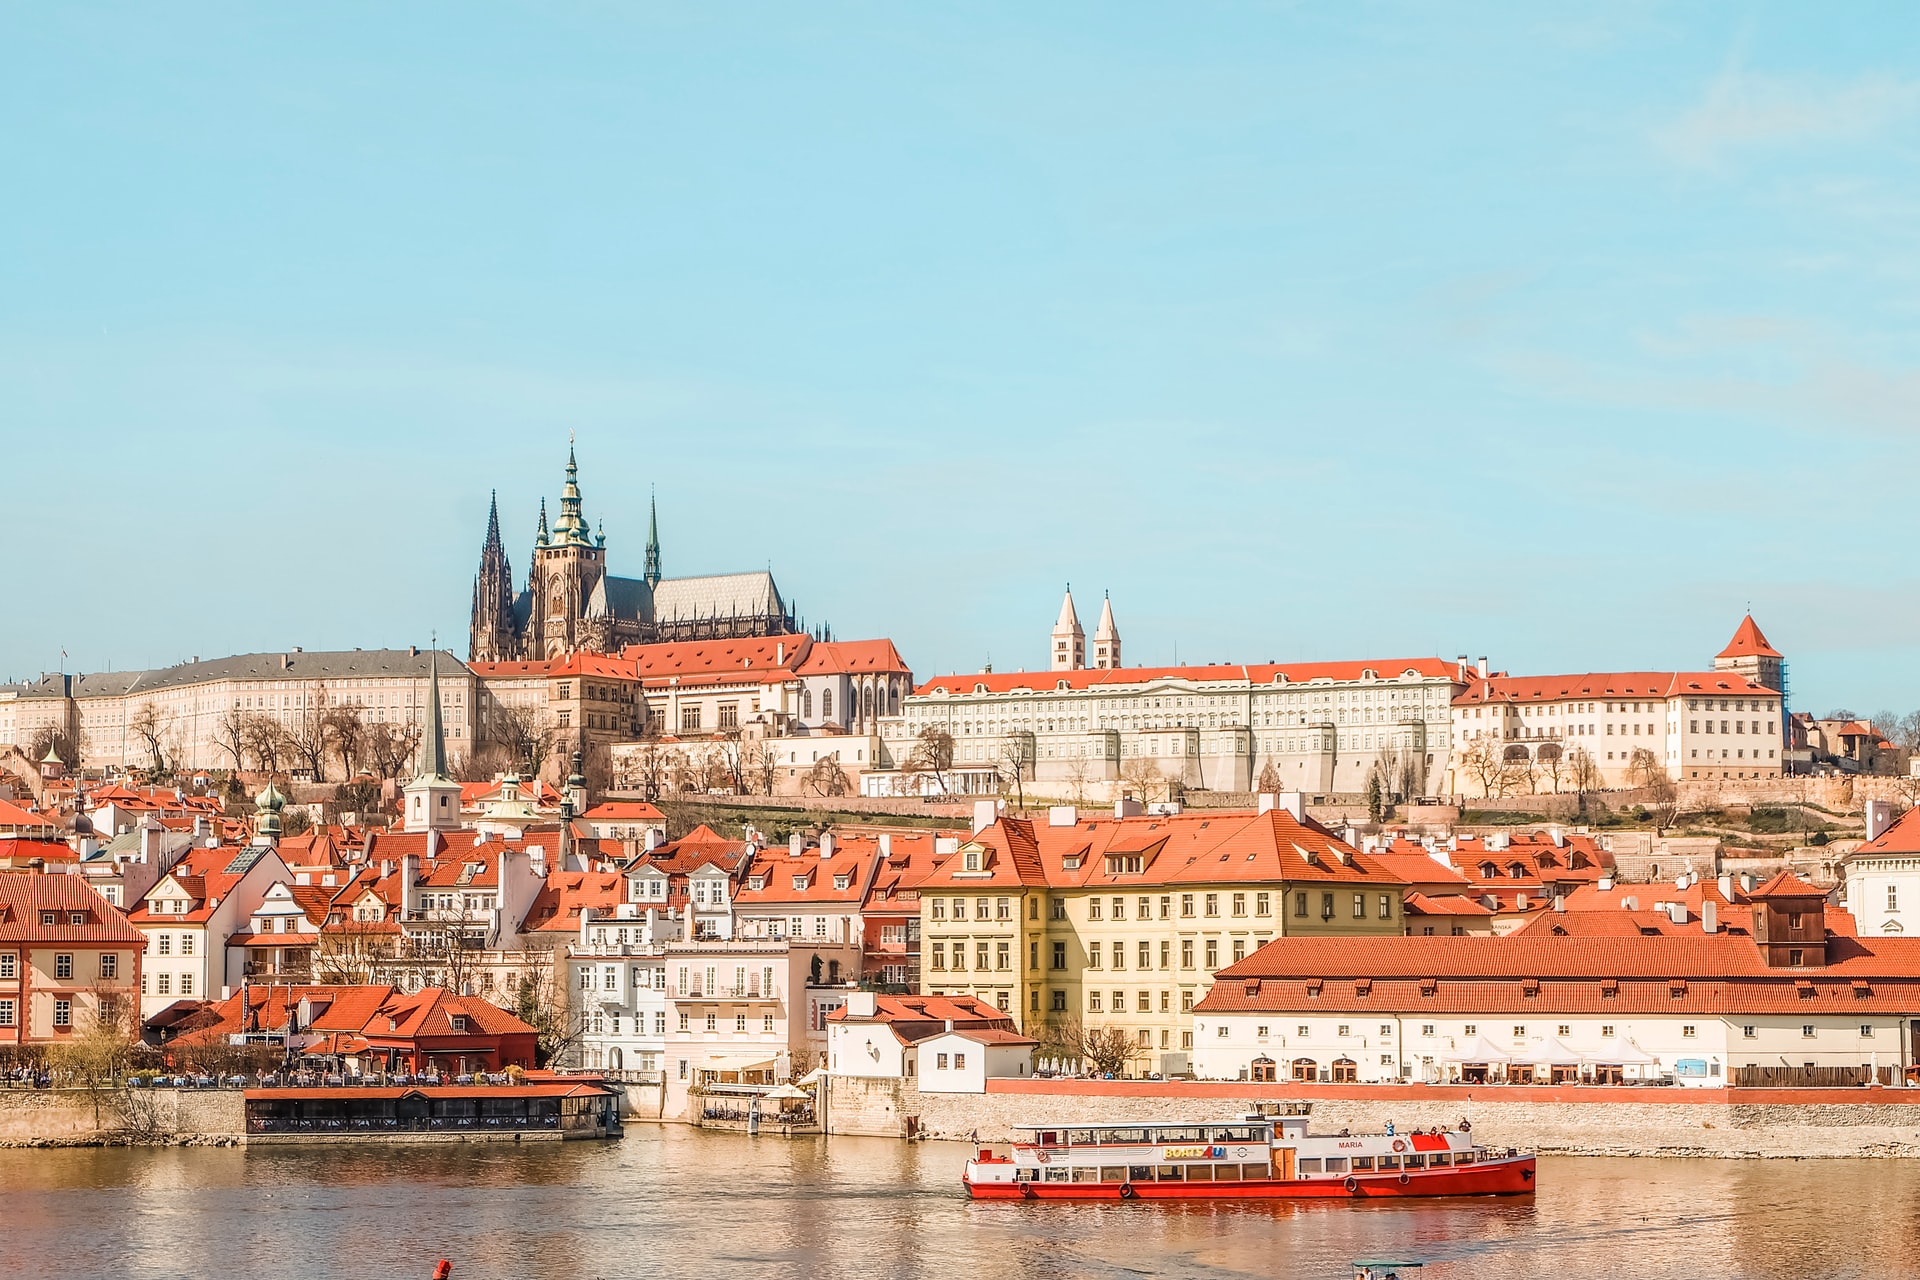 Prague Gaming Summit 2022 (21 June): Latest updates, sponsors, networking boat cruise and more